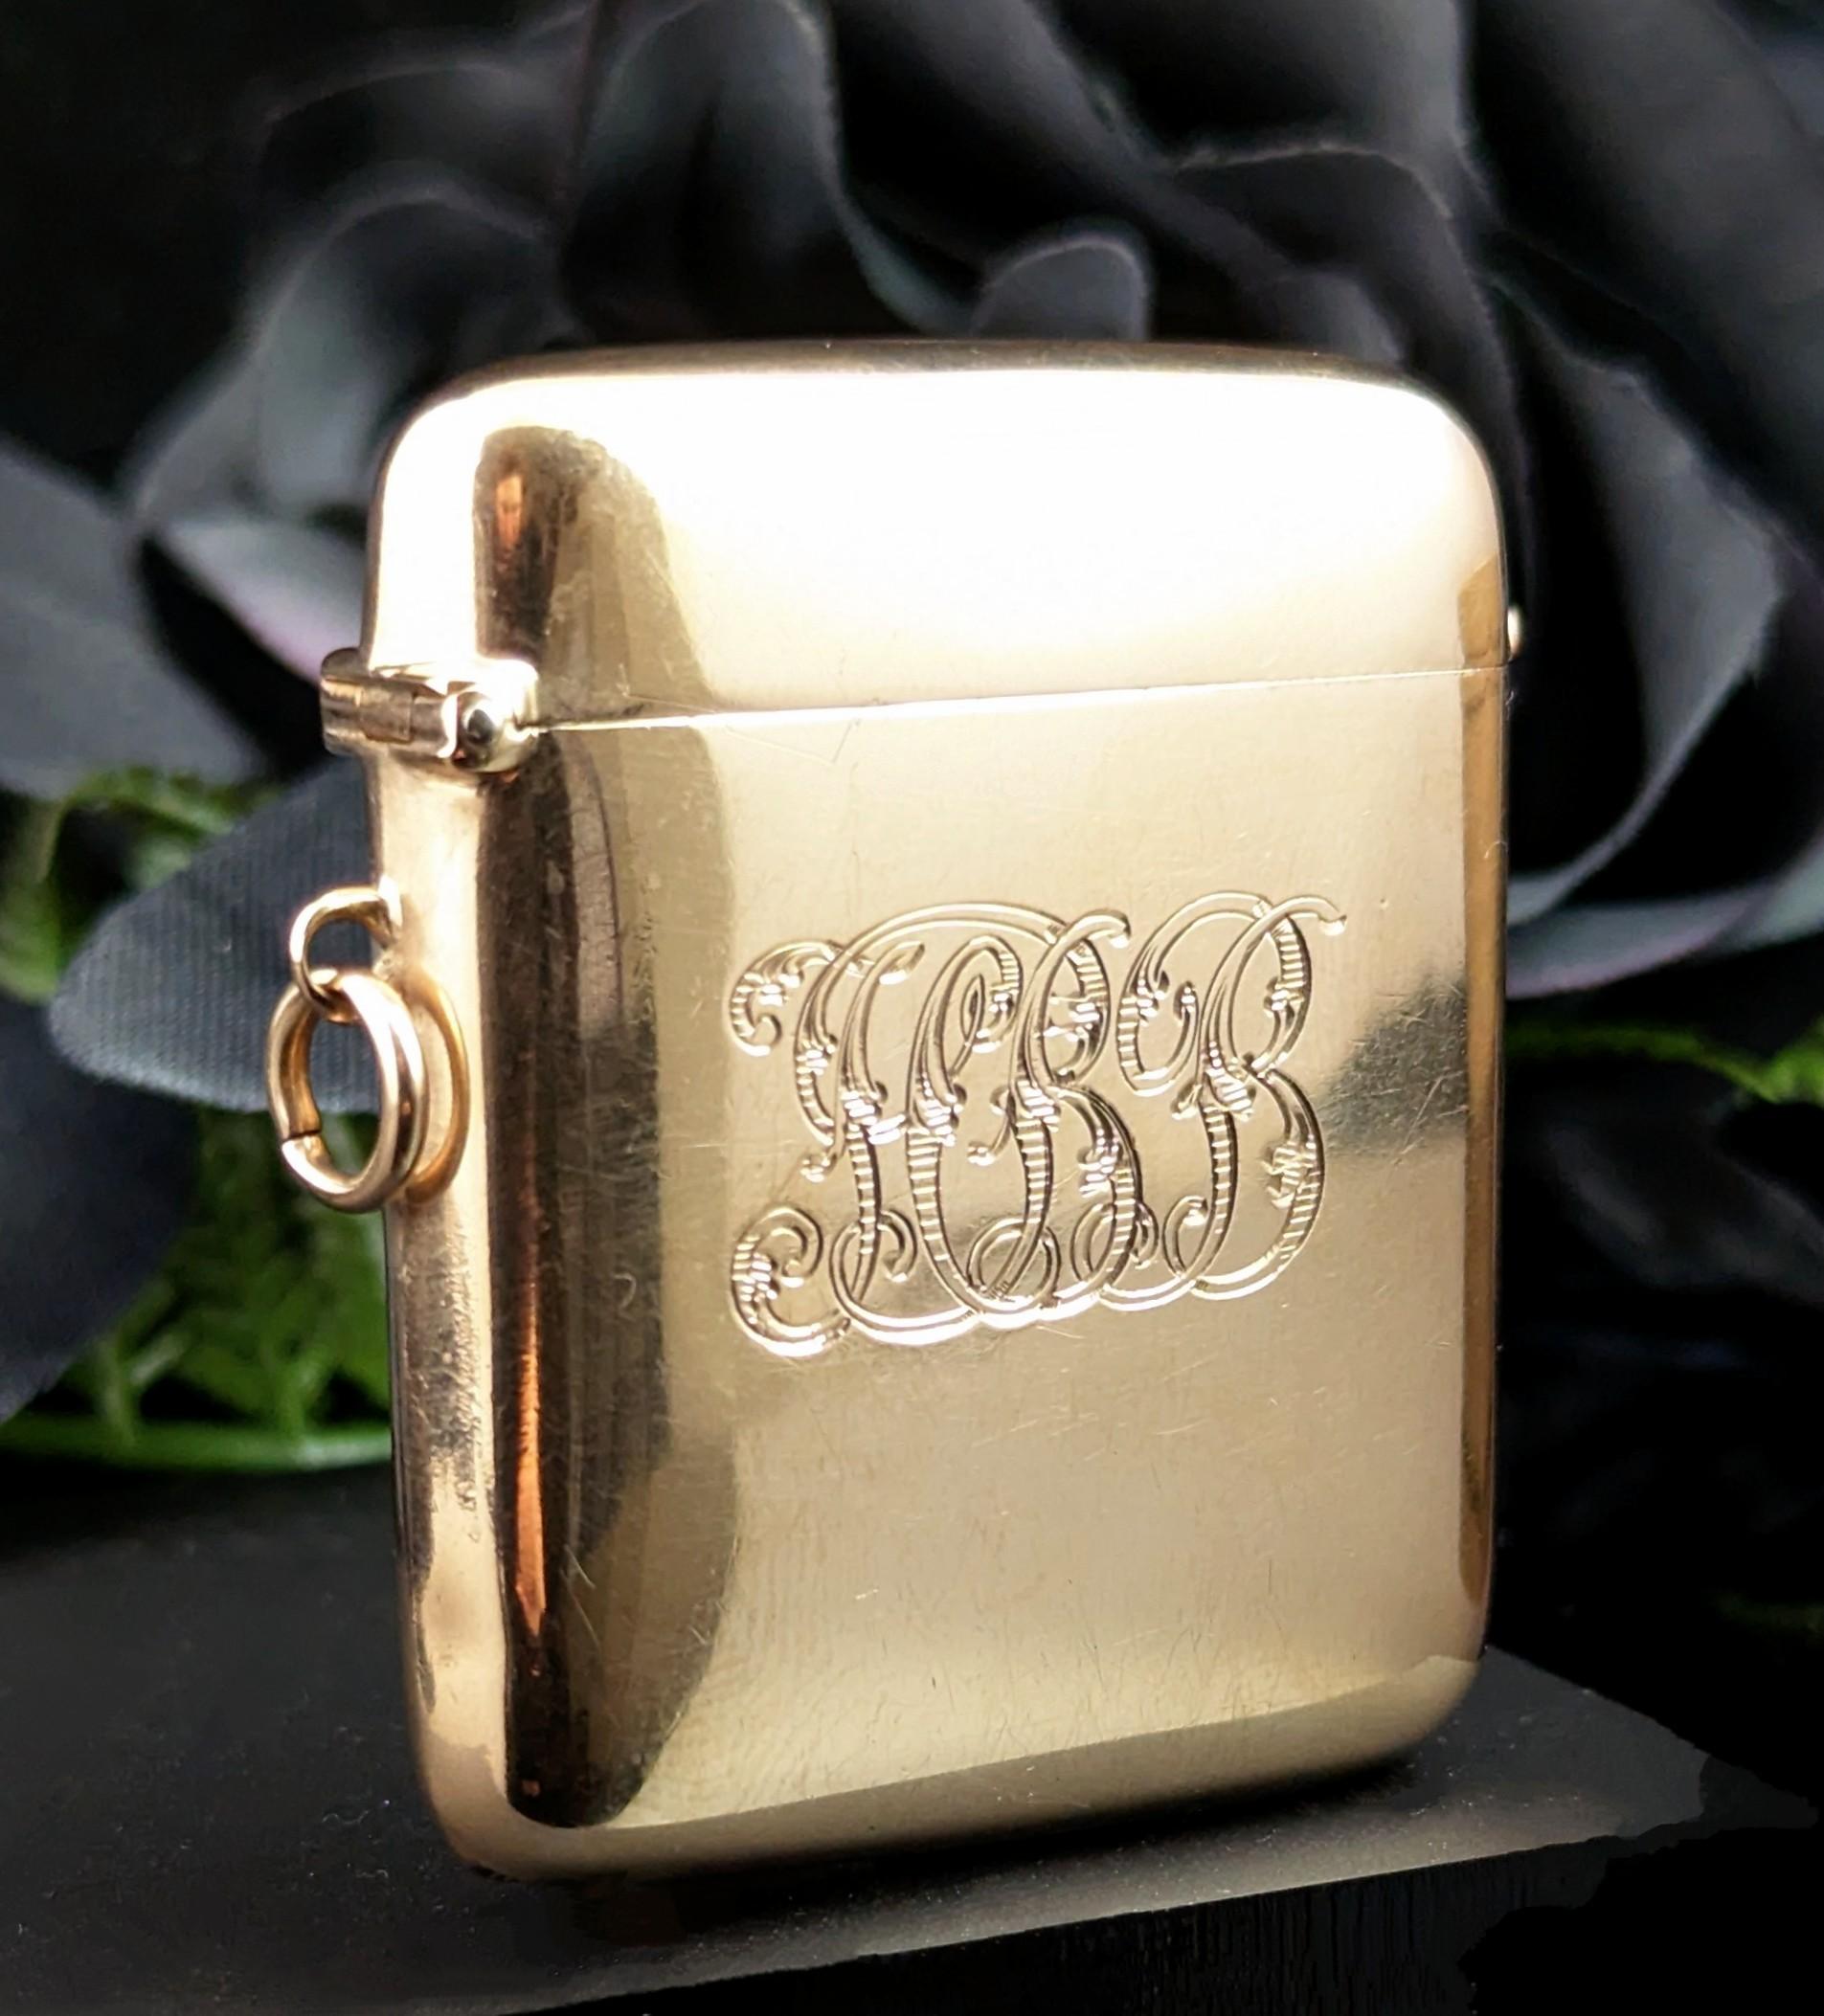 You really can't beat a fine vintage 9kt gold vesta case such as this magnificent and handsome piece!

Whether you wear it as your go to Albert chain accessory or as a statement pendant they have a certain type of charm that cannot be easily bested,